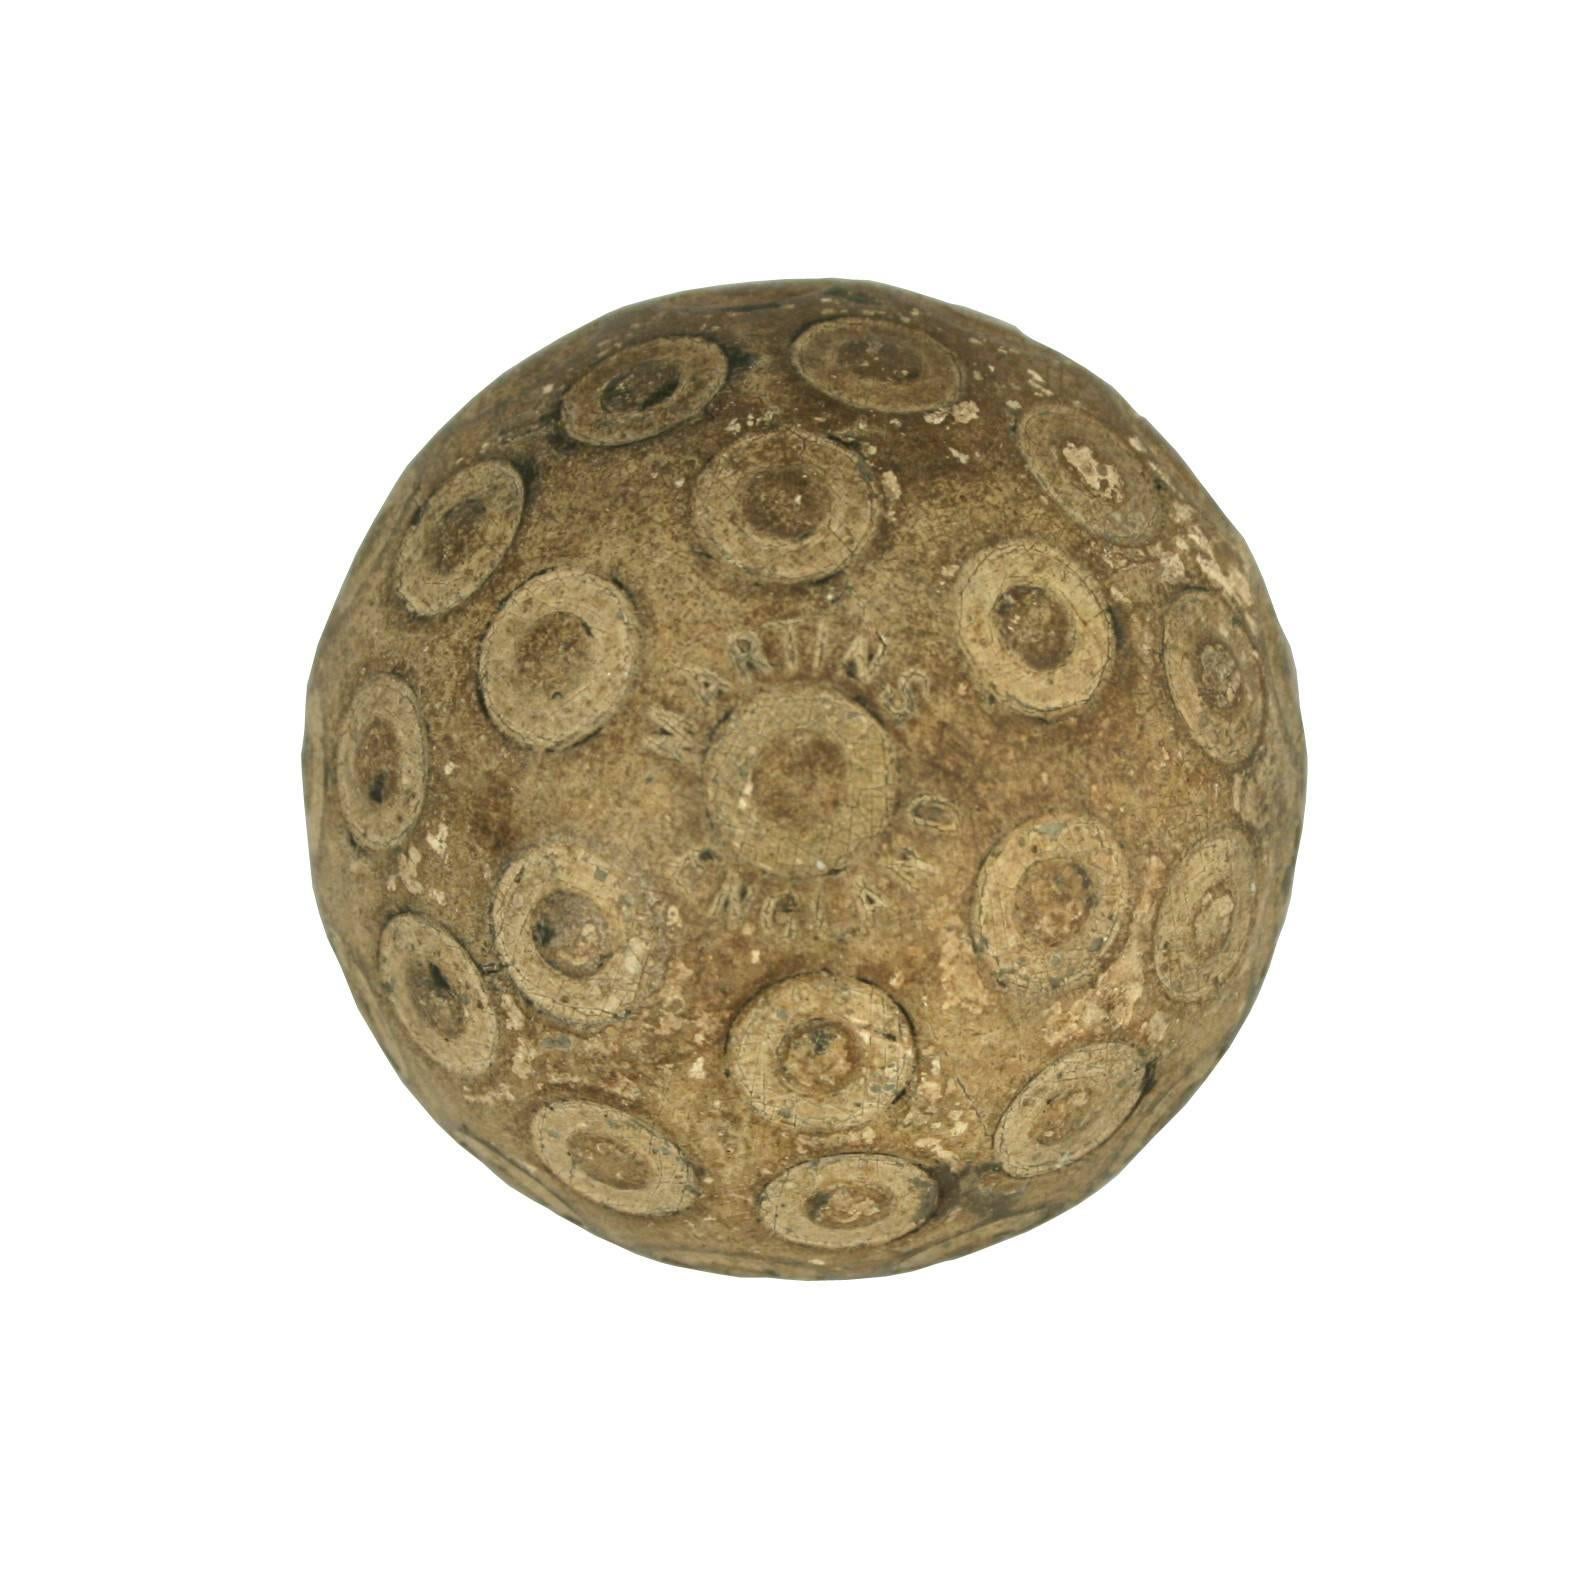 Martins ‘Zodiac’ golf Ball.
A good example of a ‘Zodiac’ rubber core golf ball with an unusual pattern. The pattern consists of raised studs within circles. The golf ball is manufactured by Martins, England. The Martins-Birmingham Ltd. was one of